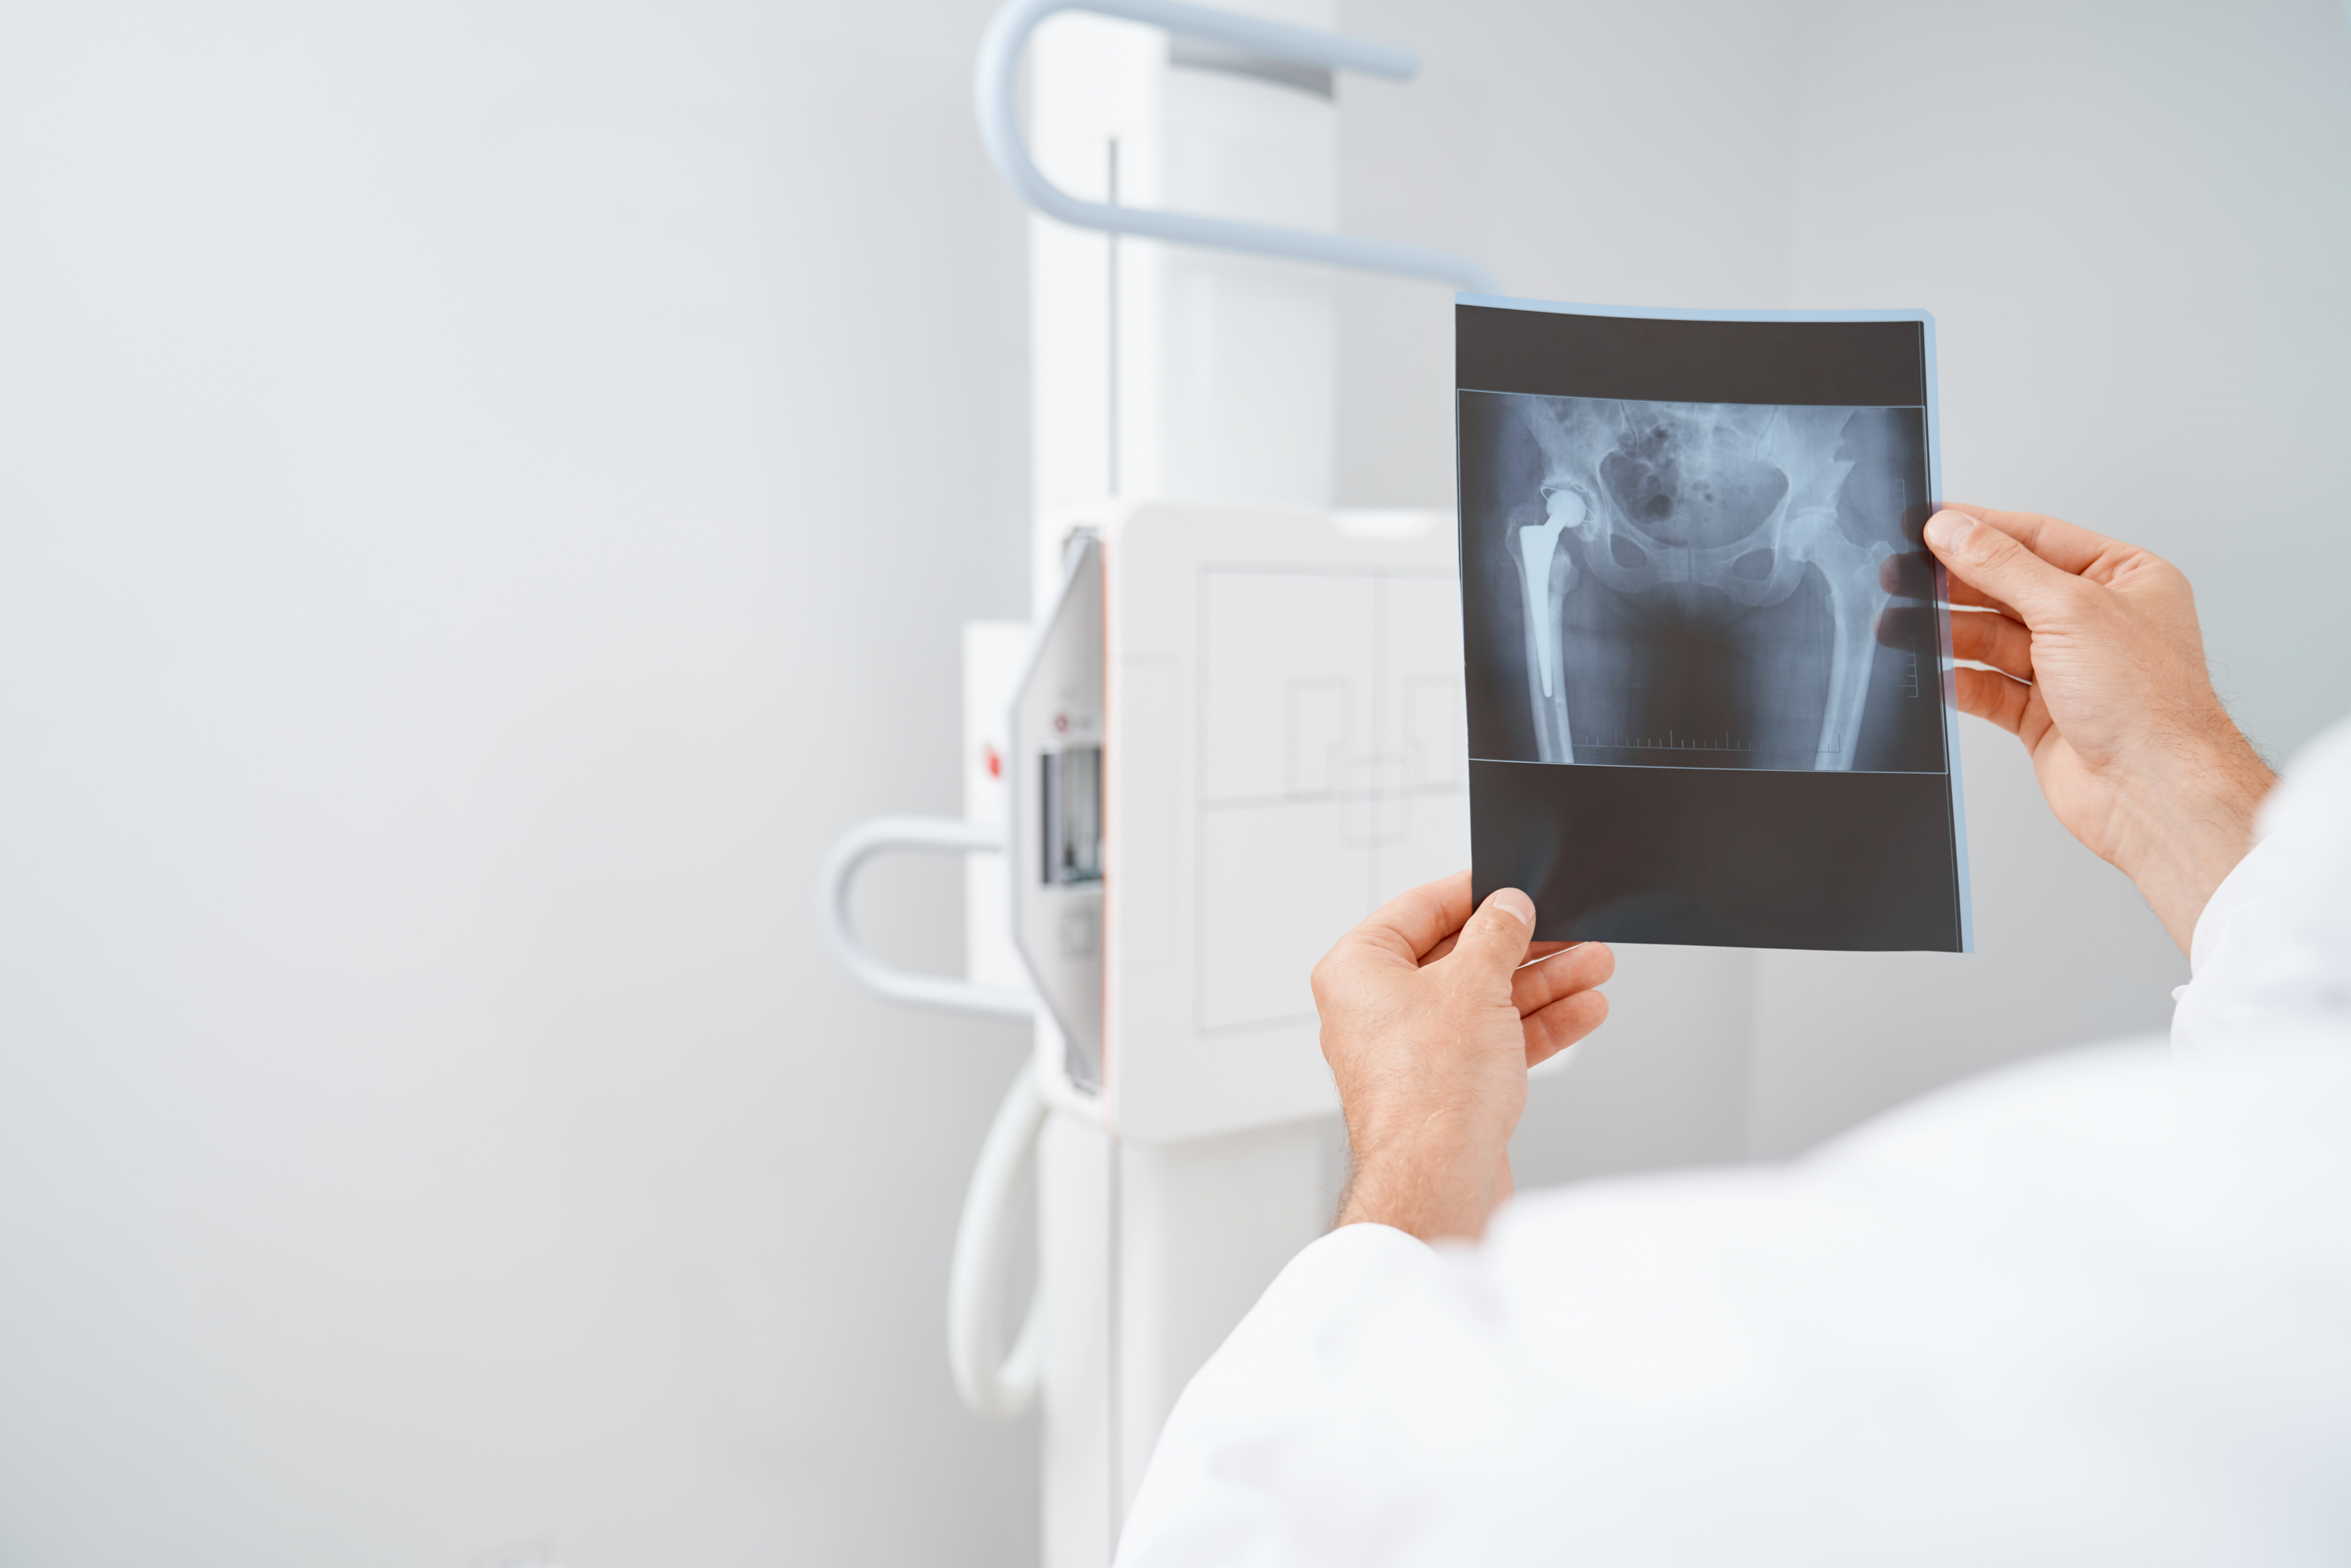 The X-ray analysis helps the doctor to determine bone density.